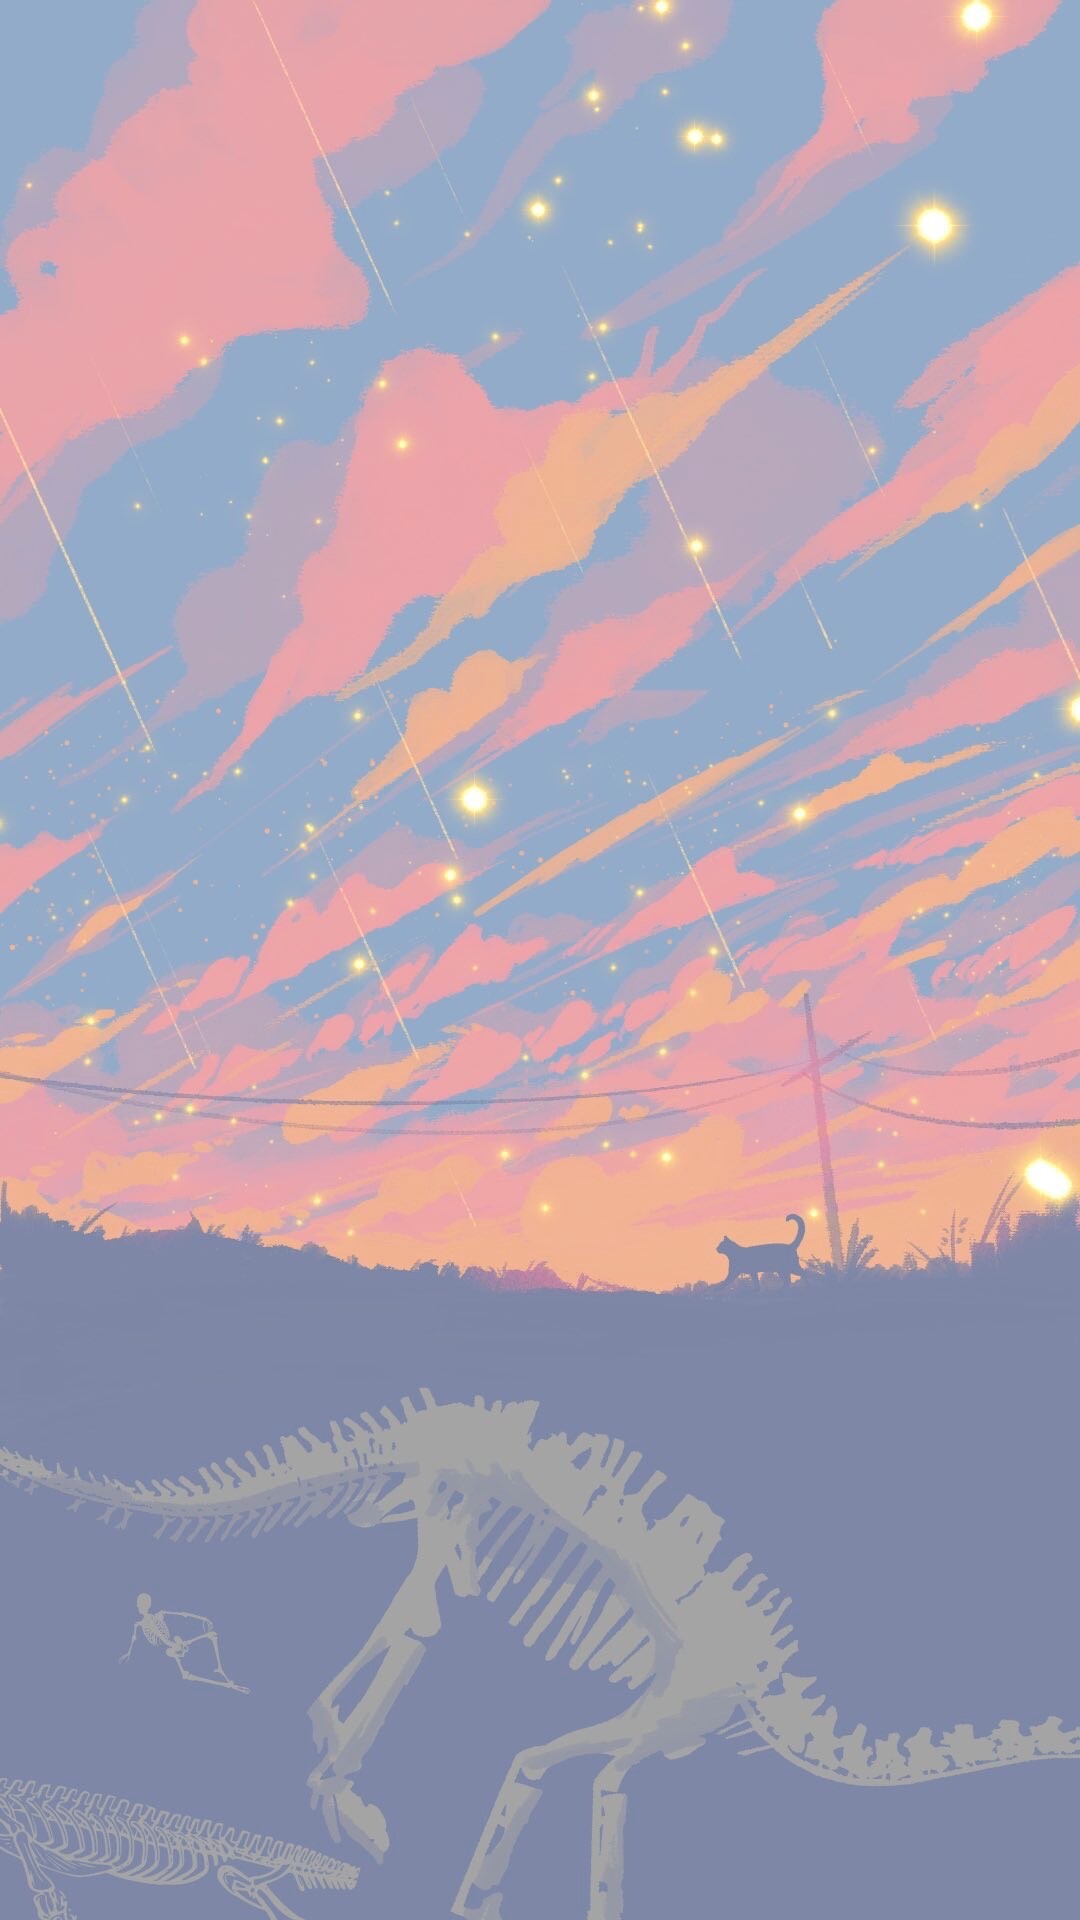 A digital painting of the orange and pink skies across the blue sky above the ground with a cat and dinosaur fossil underneath